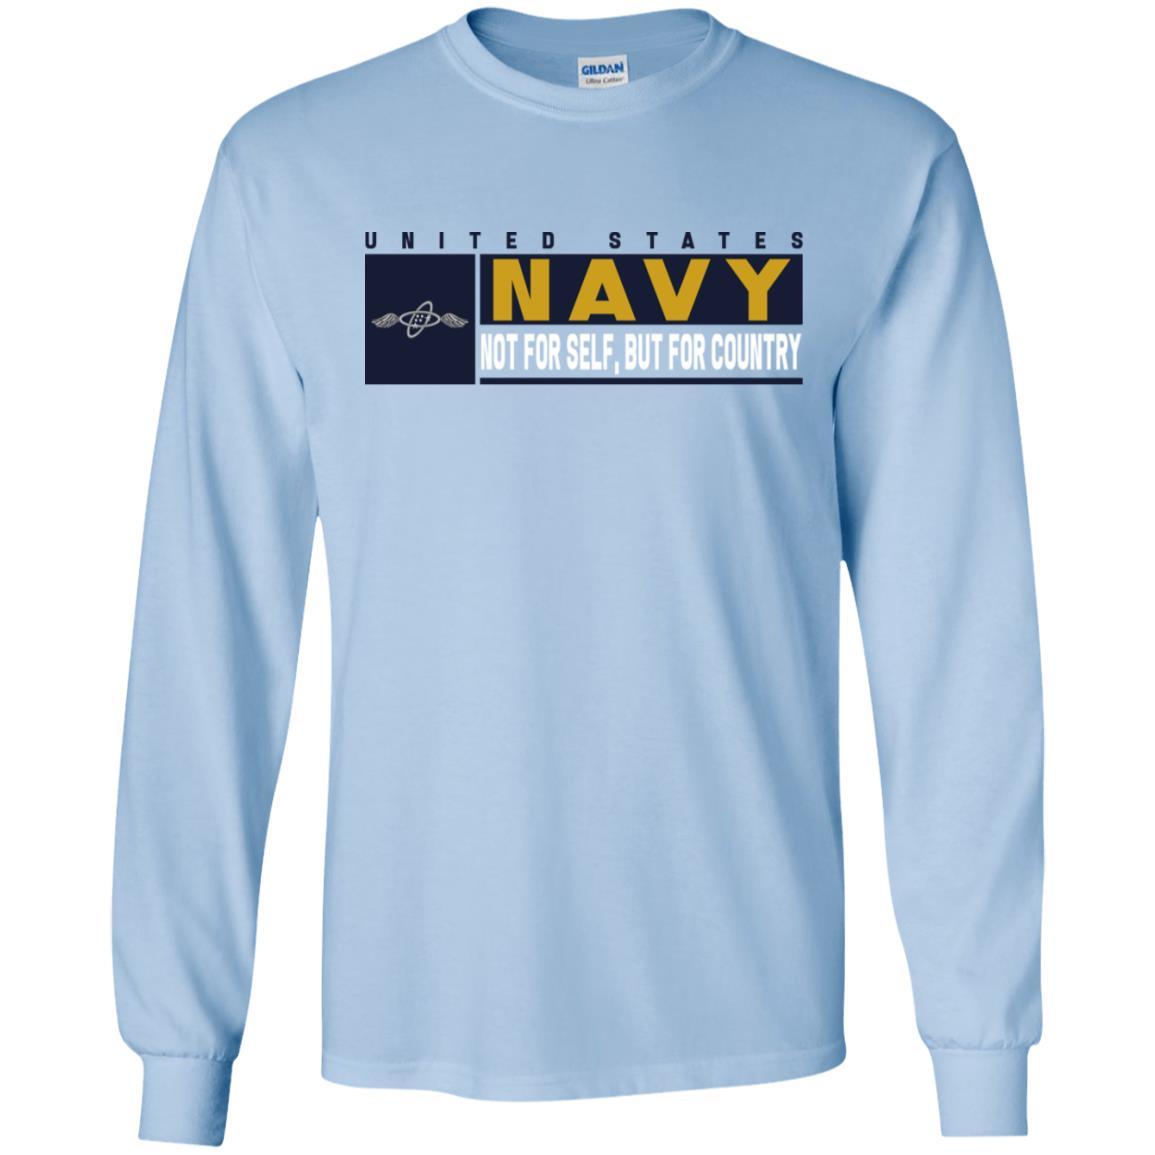 Navy Aviation Electronics Technician Navy AT- Not for self Long Sleeve - Pullover Hoodie-TShirt-Navy-Veterans Nation